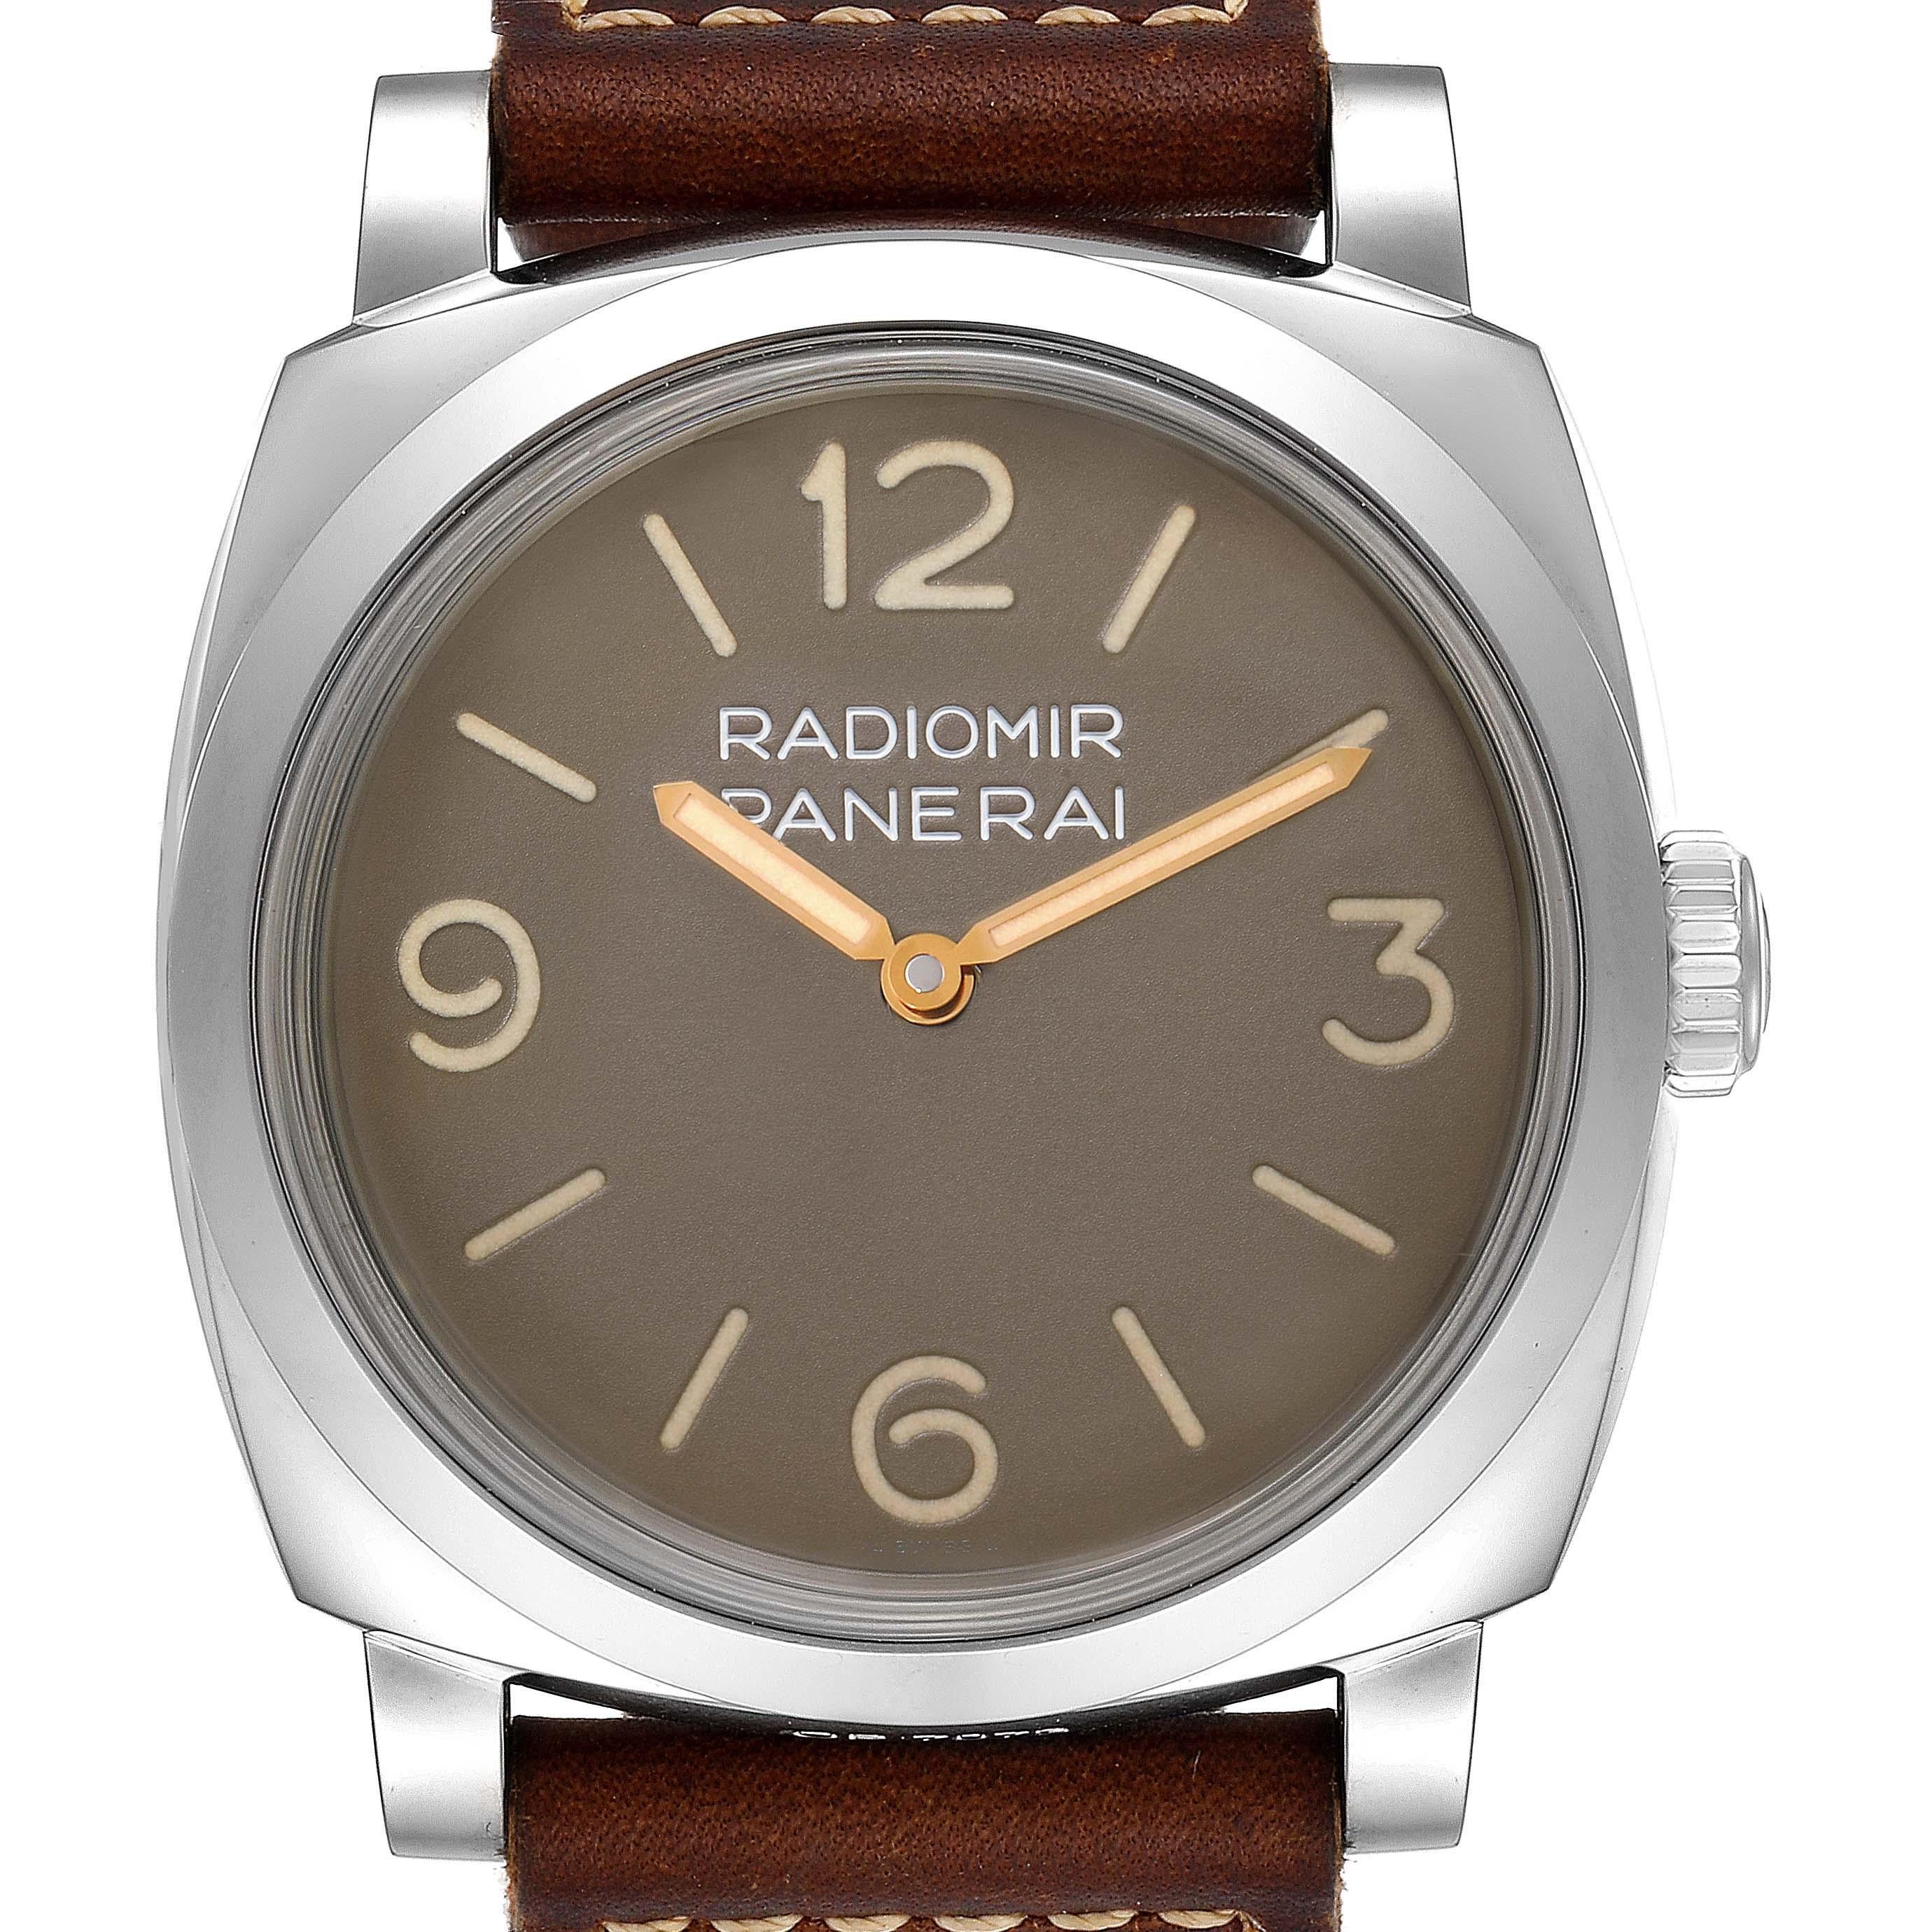 Panerai Radiomir 1940 47mm Brown Dial Steel Mens Watch PAM00662 Unworn. Manual-winding movement. Two part cushion shaped stainless steel case 47.0 mm in diameter. Exhibition transparent sapphire crystal caseback. Stainless steel sloped bezel.